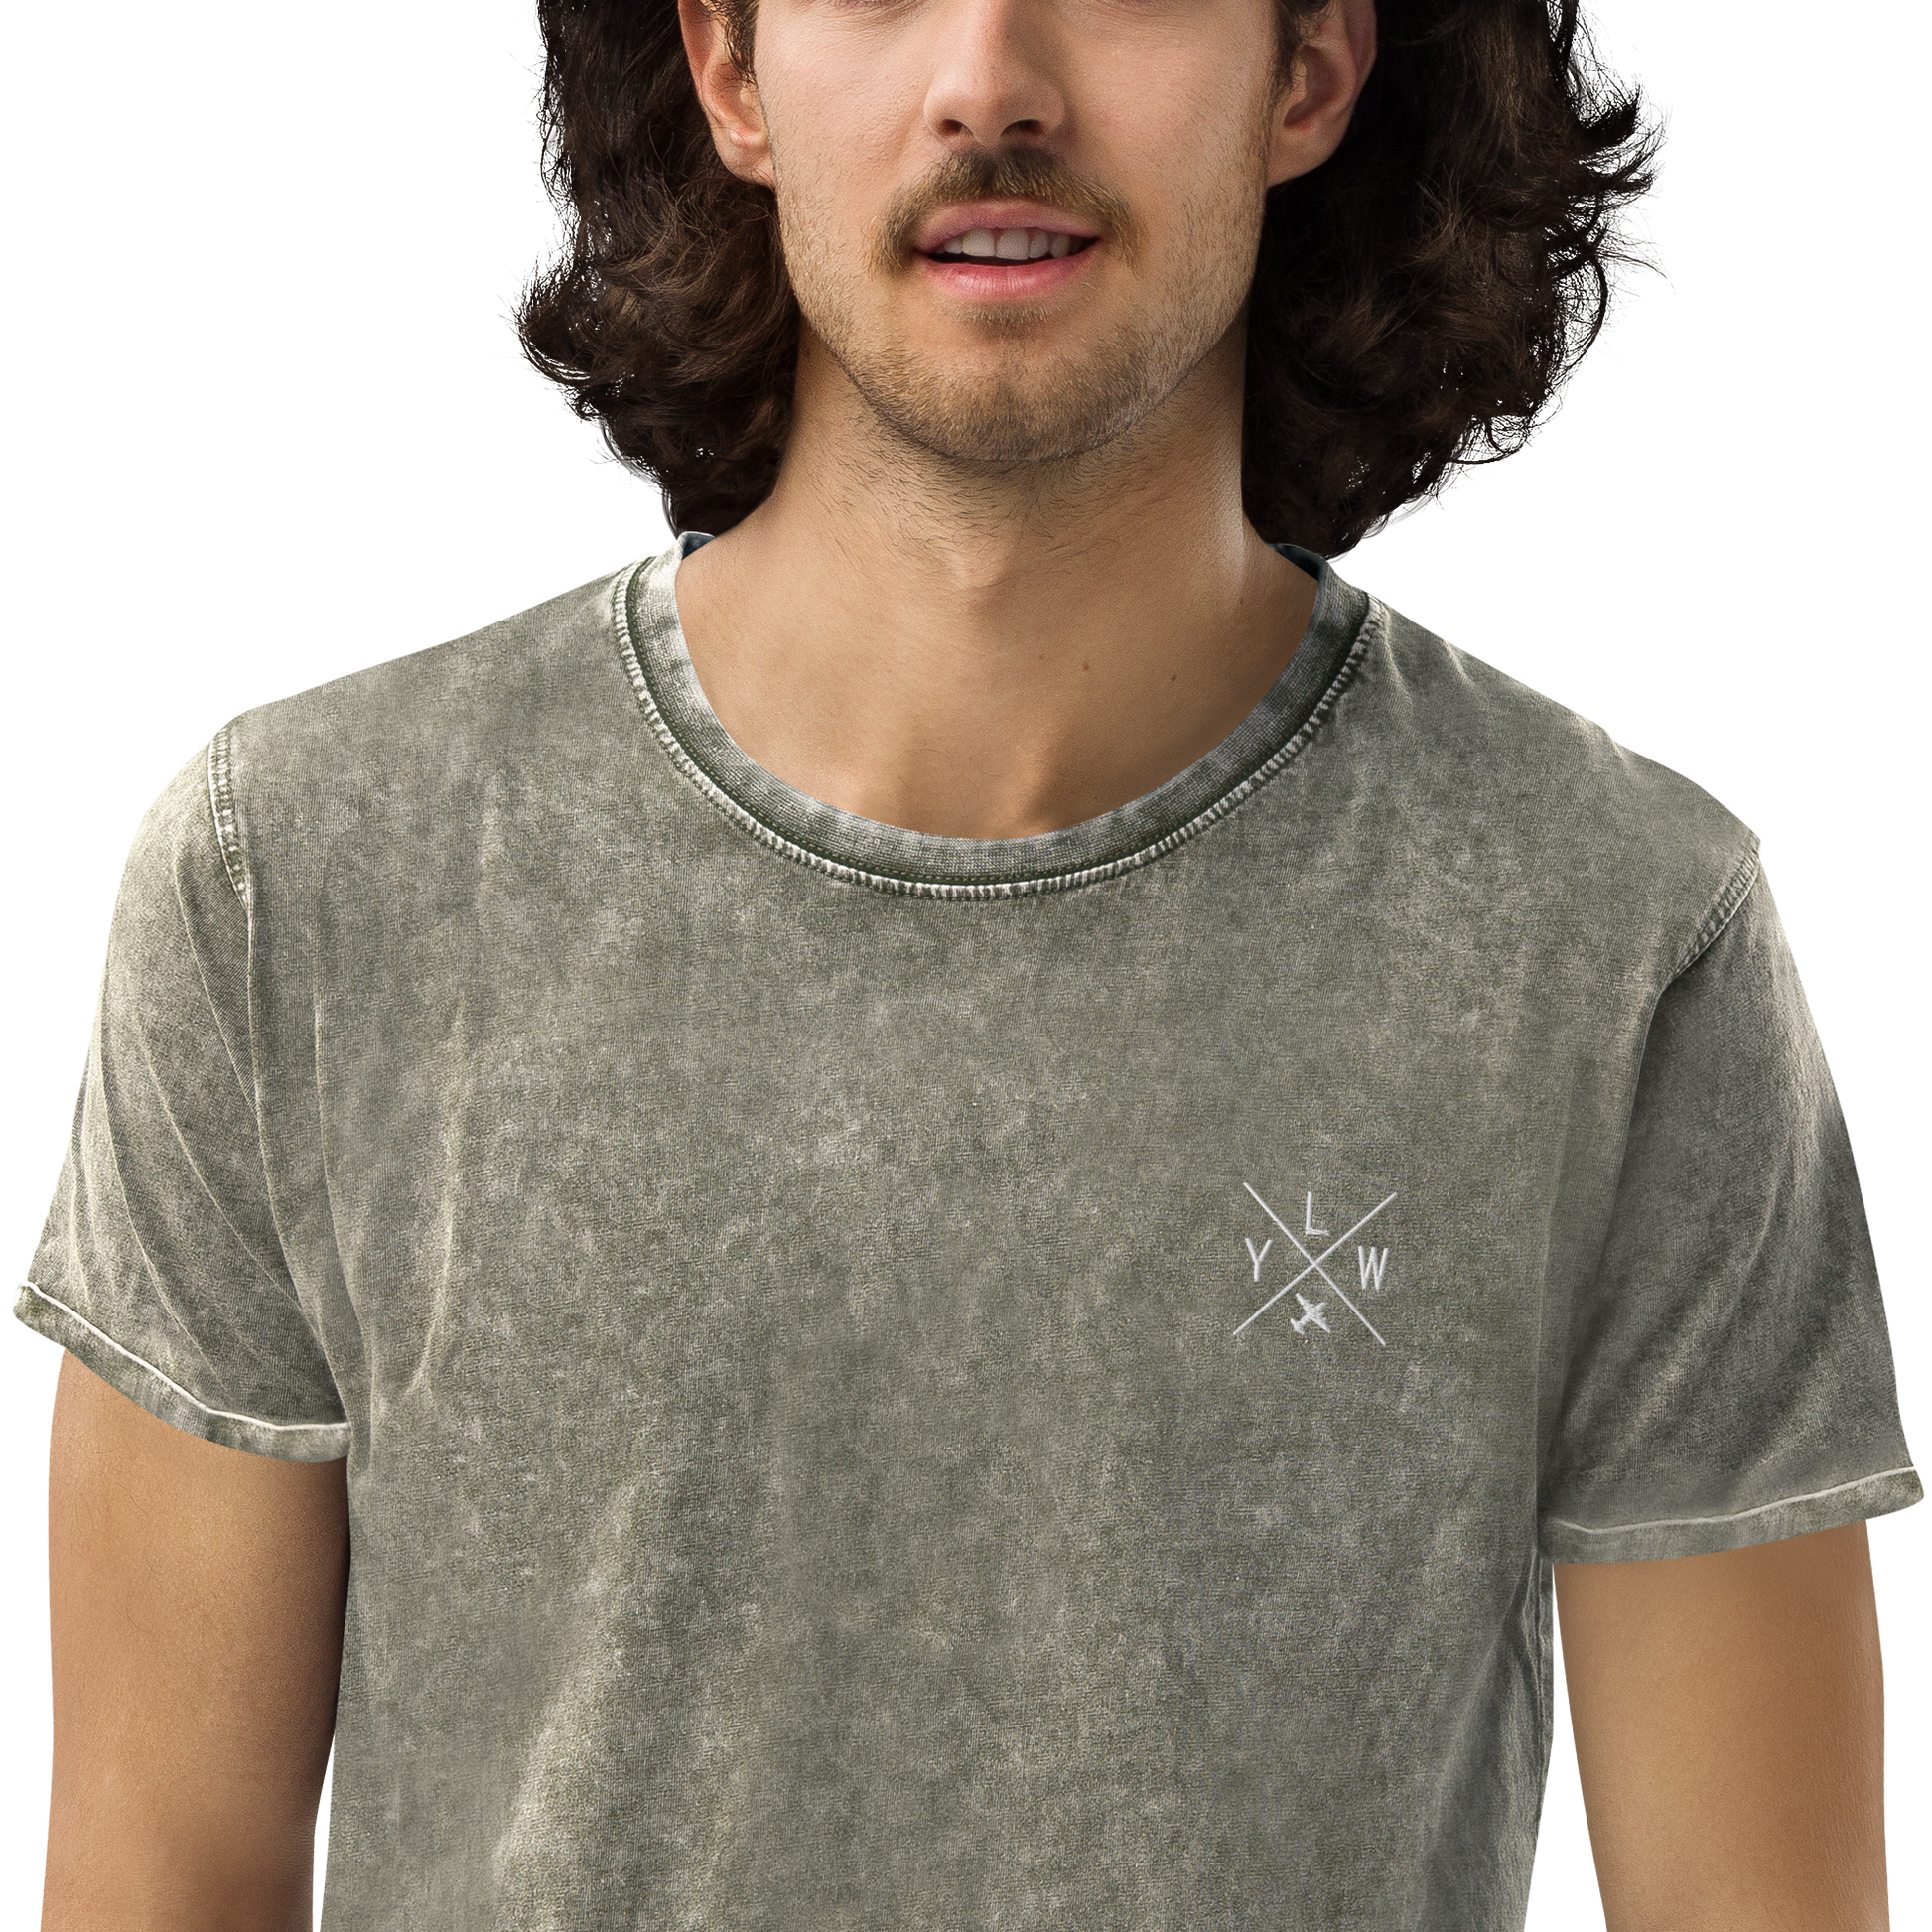 YHM Designs - YLW Kelowna Denim T-Shirt - Crossed-X Design with Airport Code and Vintage Propliner - White Embroidery - Image 11